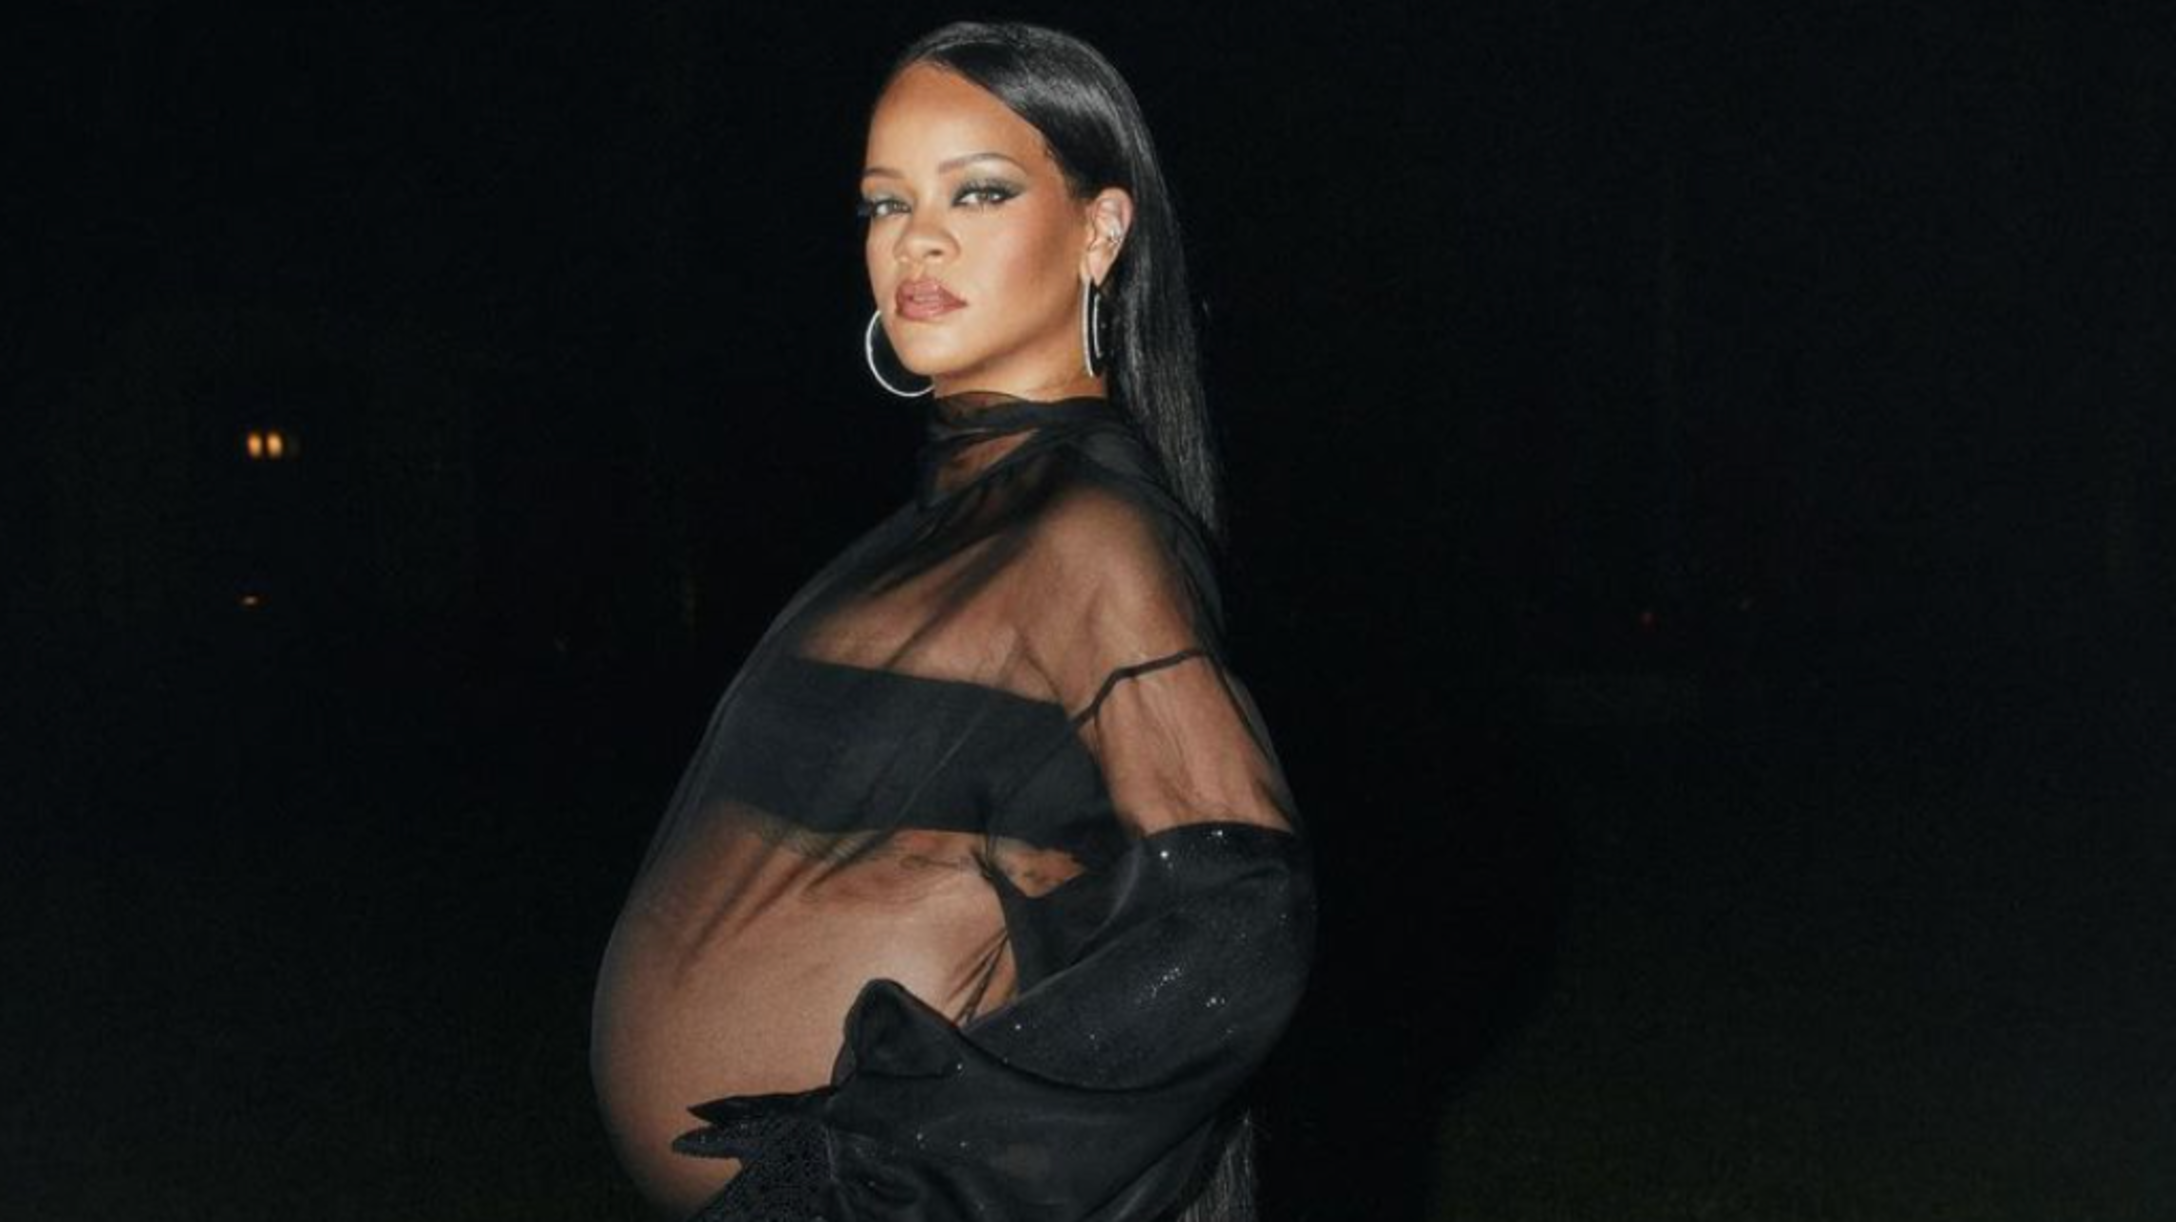 Rihanna Proudly Displays Baby Bump on Cover of 'Vogue